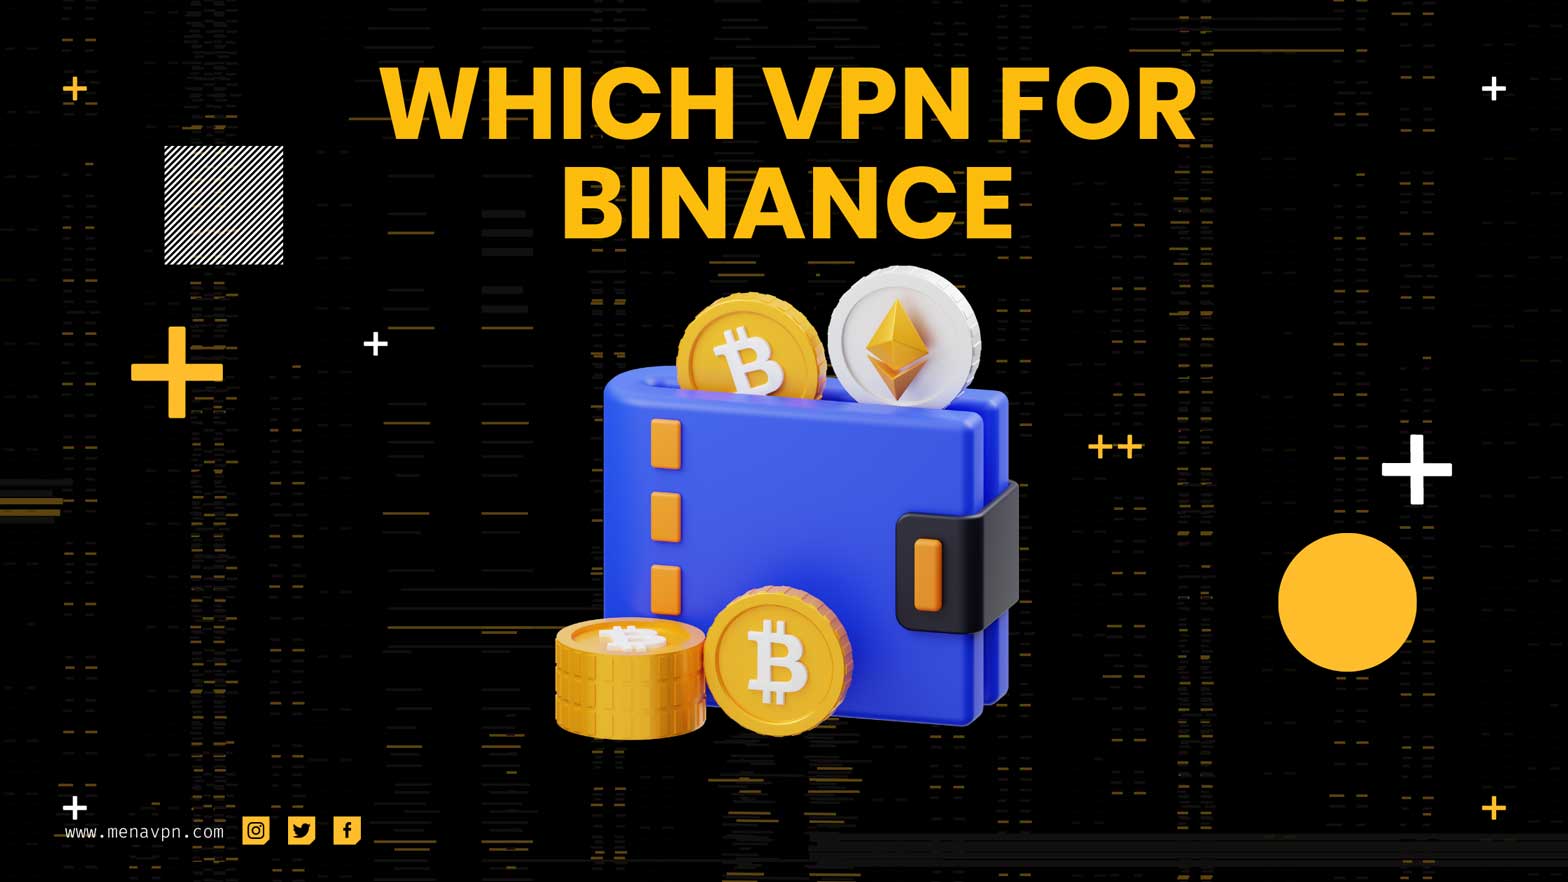 How to Access Binance From Anywhere in (Only 3 Steps)